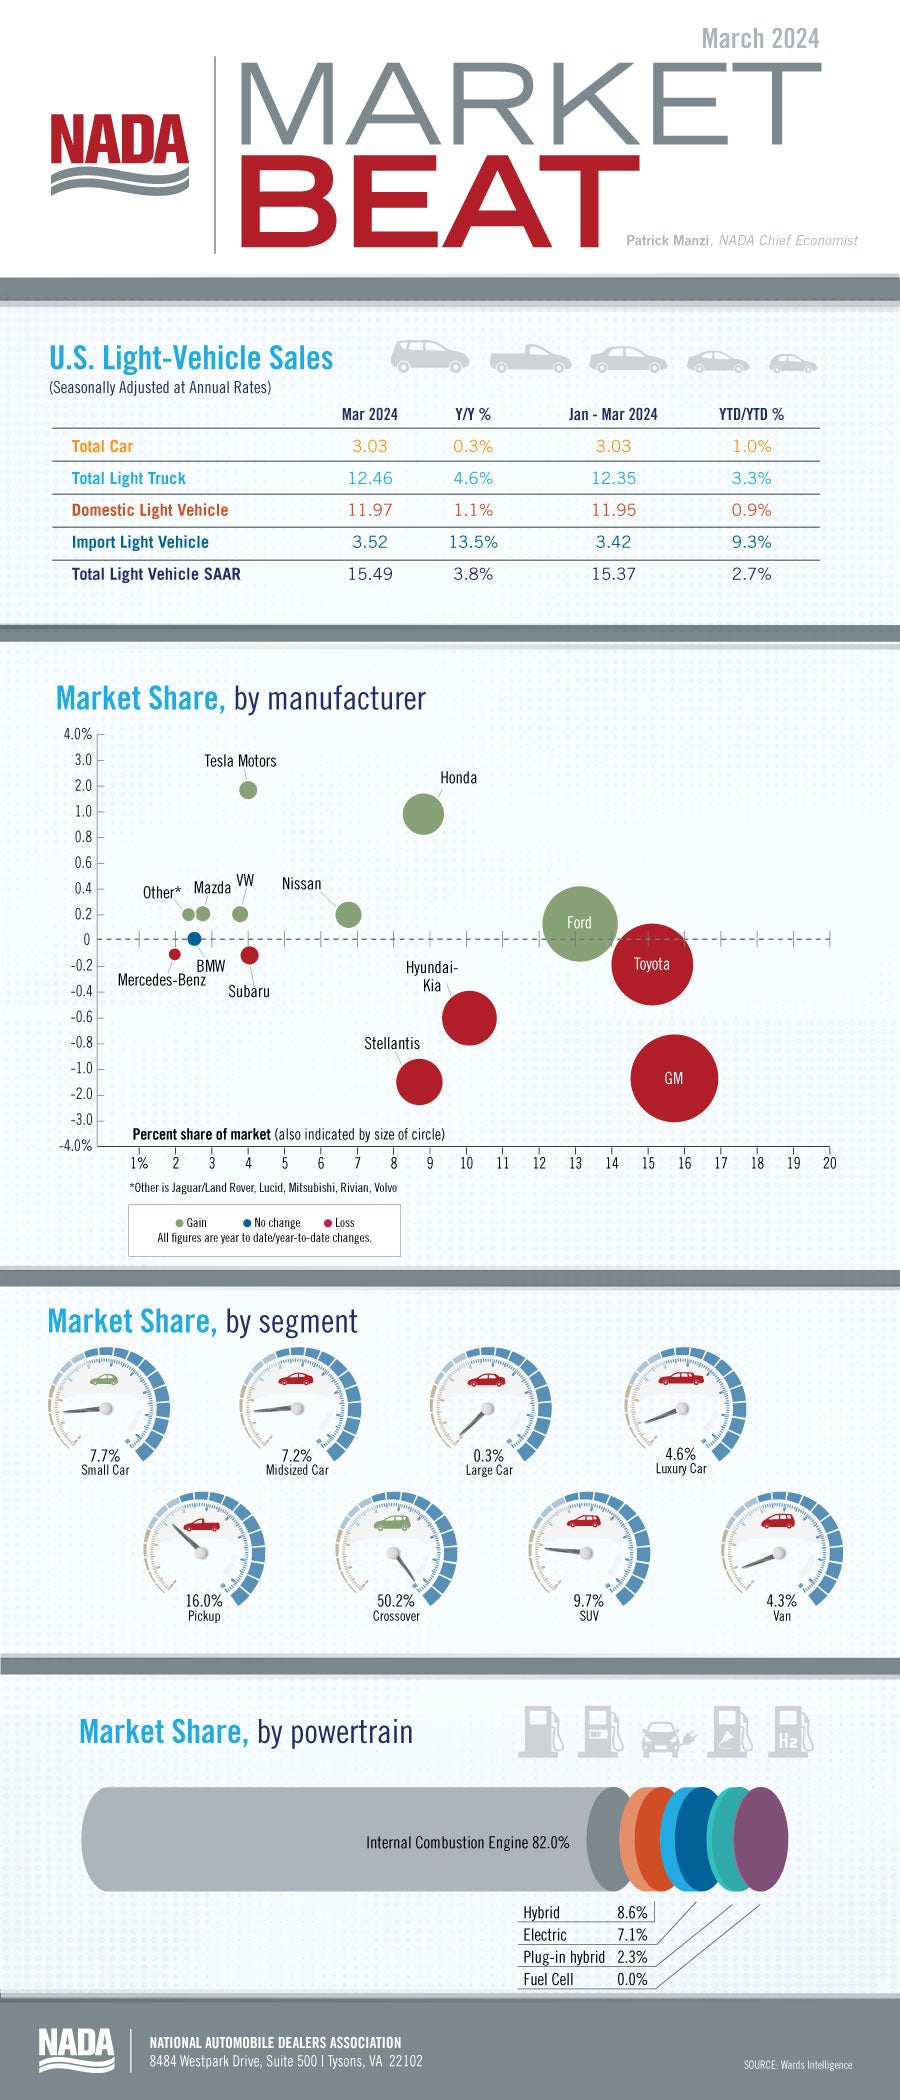 Market Beat infographic March 2024